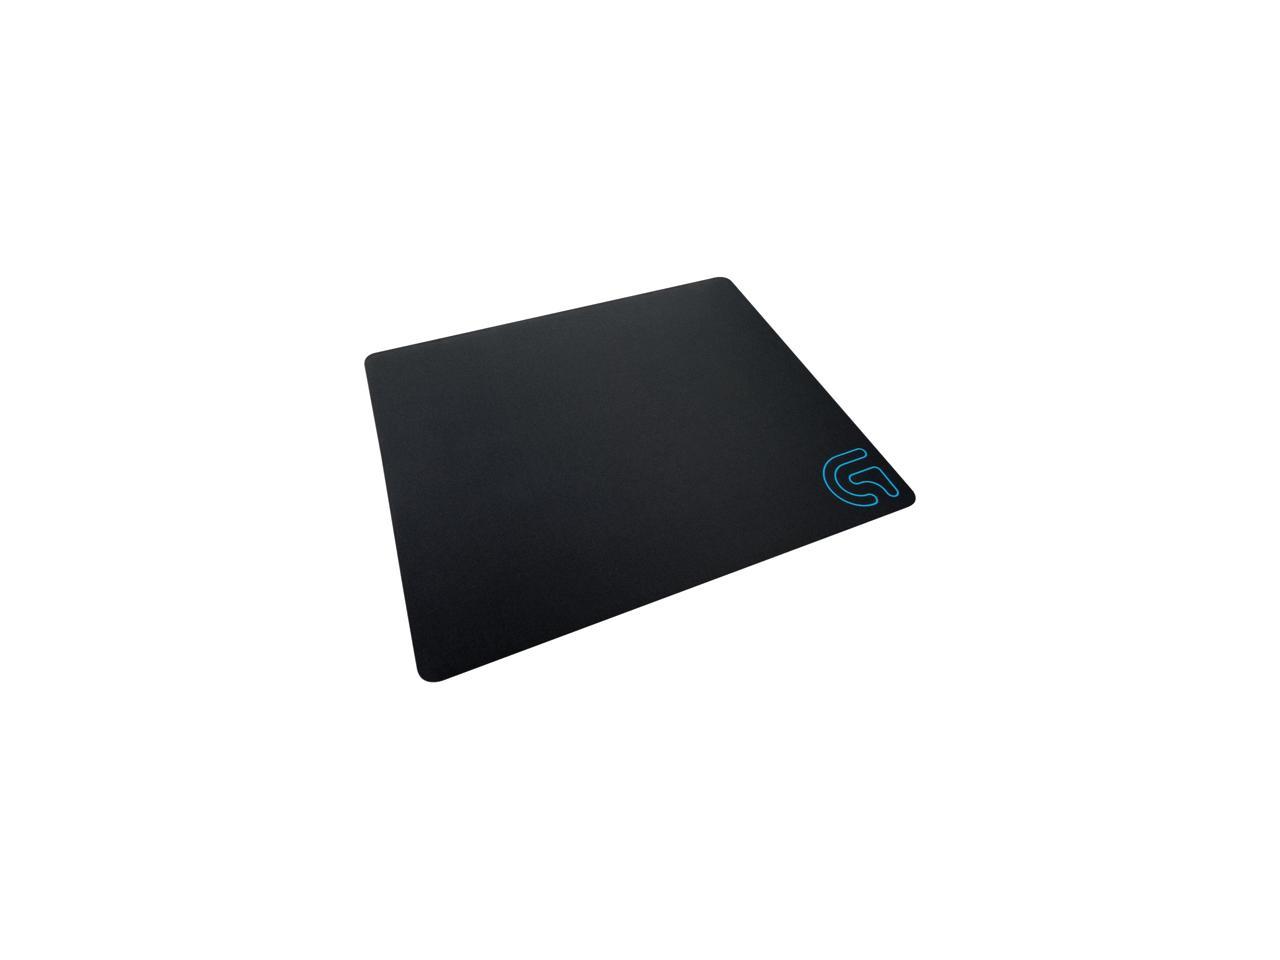 Logitech G240 CLOTH GAMING MOUSE PAD